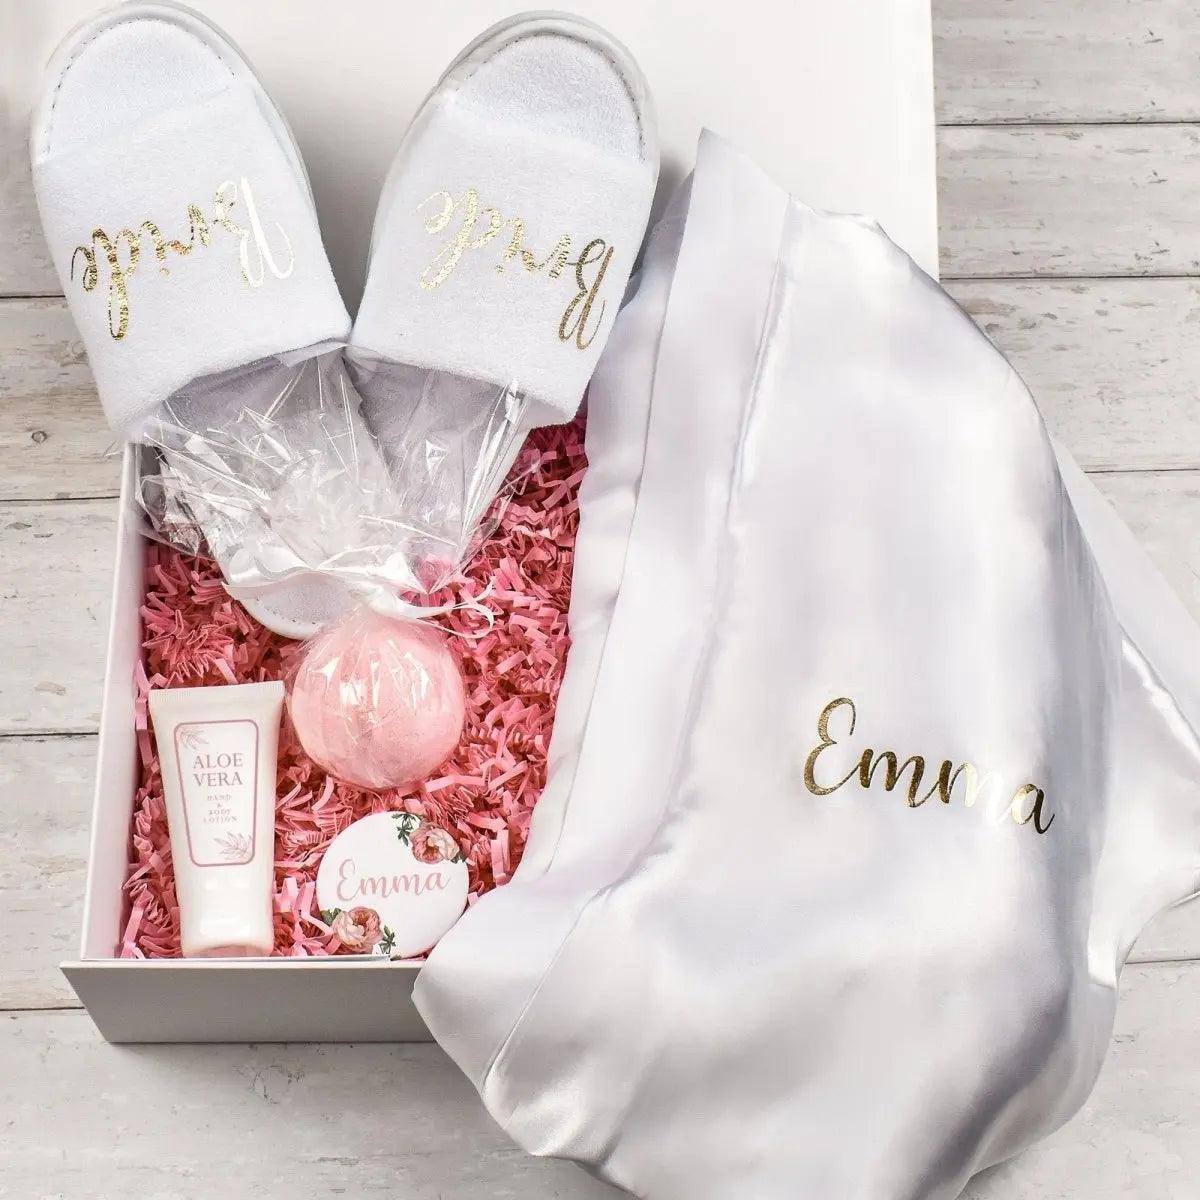 Personalised Bride To Be Gift Box, Bride To Be Filled Gift Box, Bride To Be Spa Box Set, Wedding Morning Bride Box Set Gift, Wedding Gift, - Amy Lucy